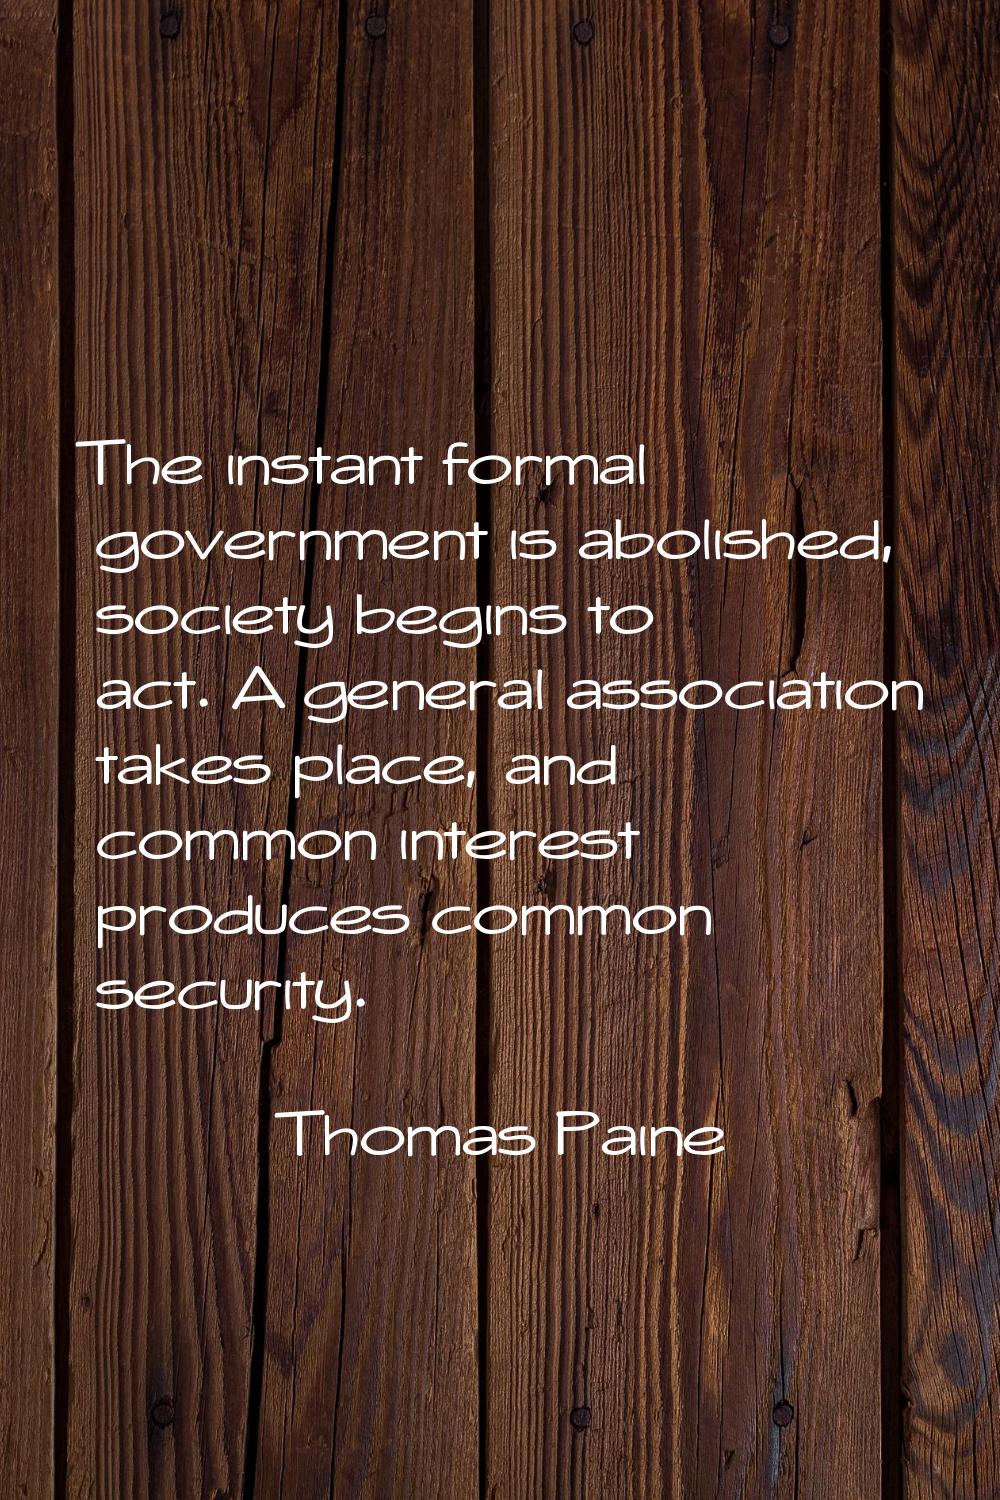 The instant formal government is abolished, society begins to act. A general association takes plac